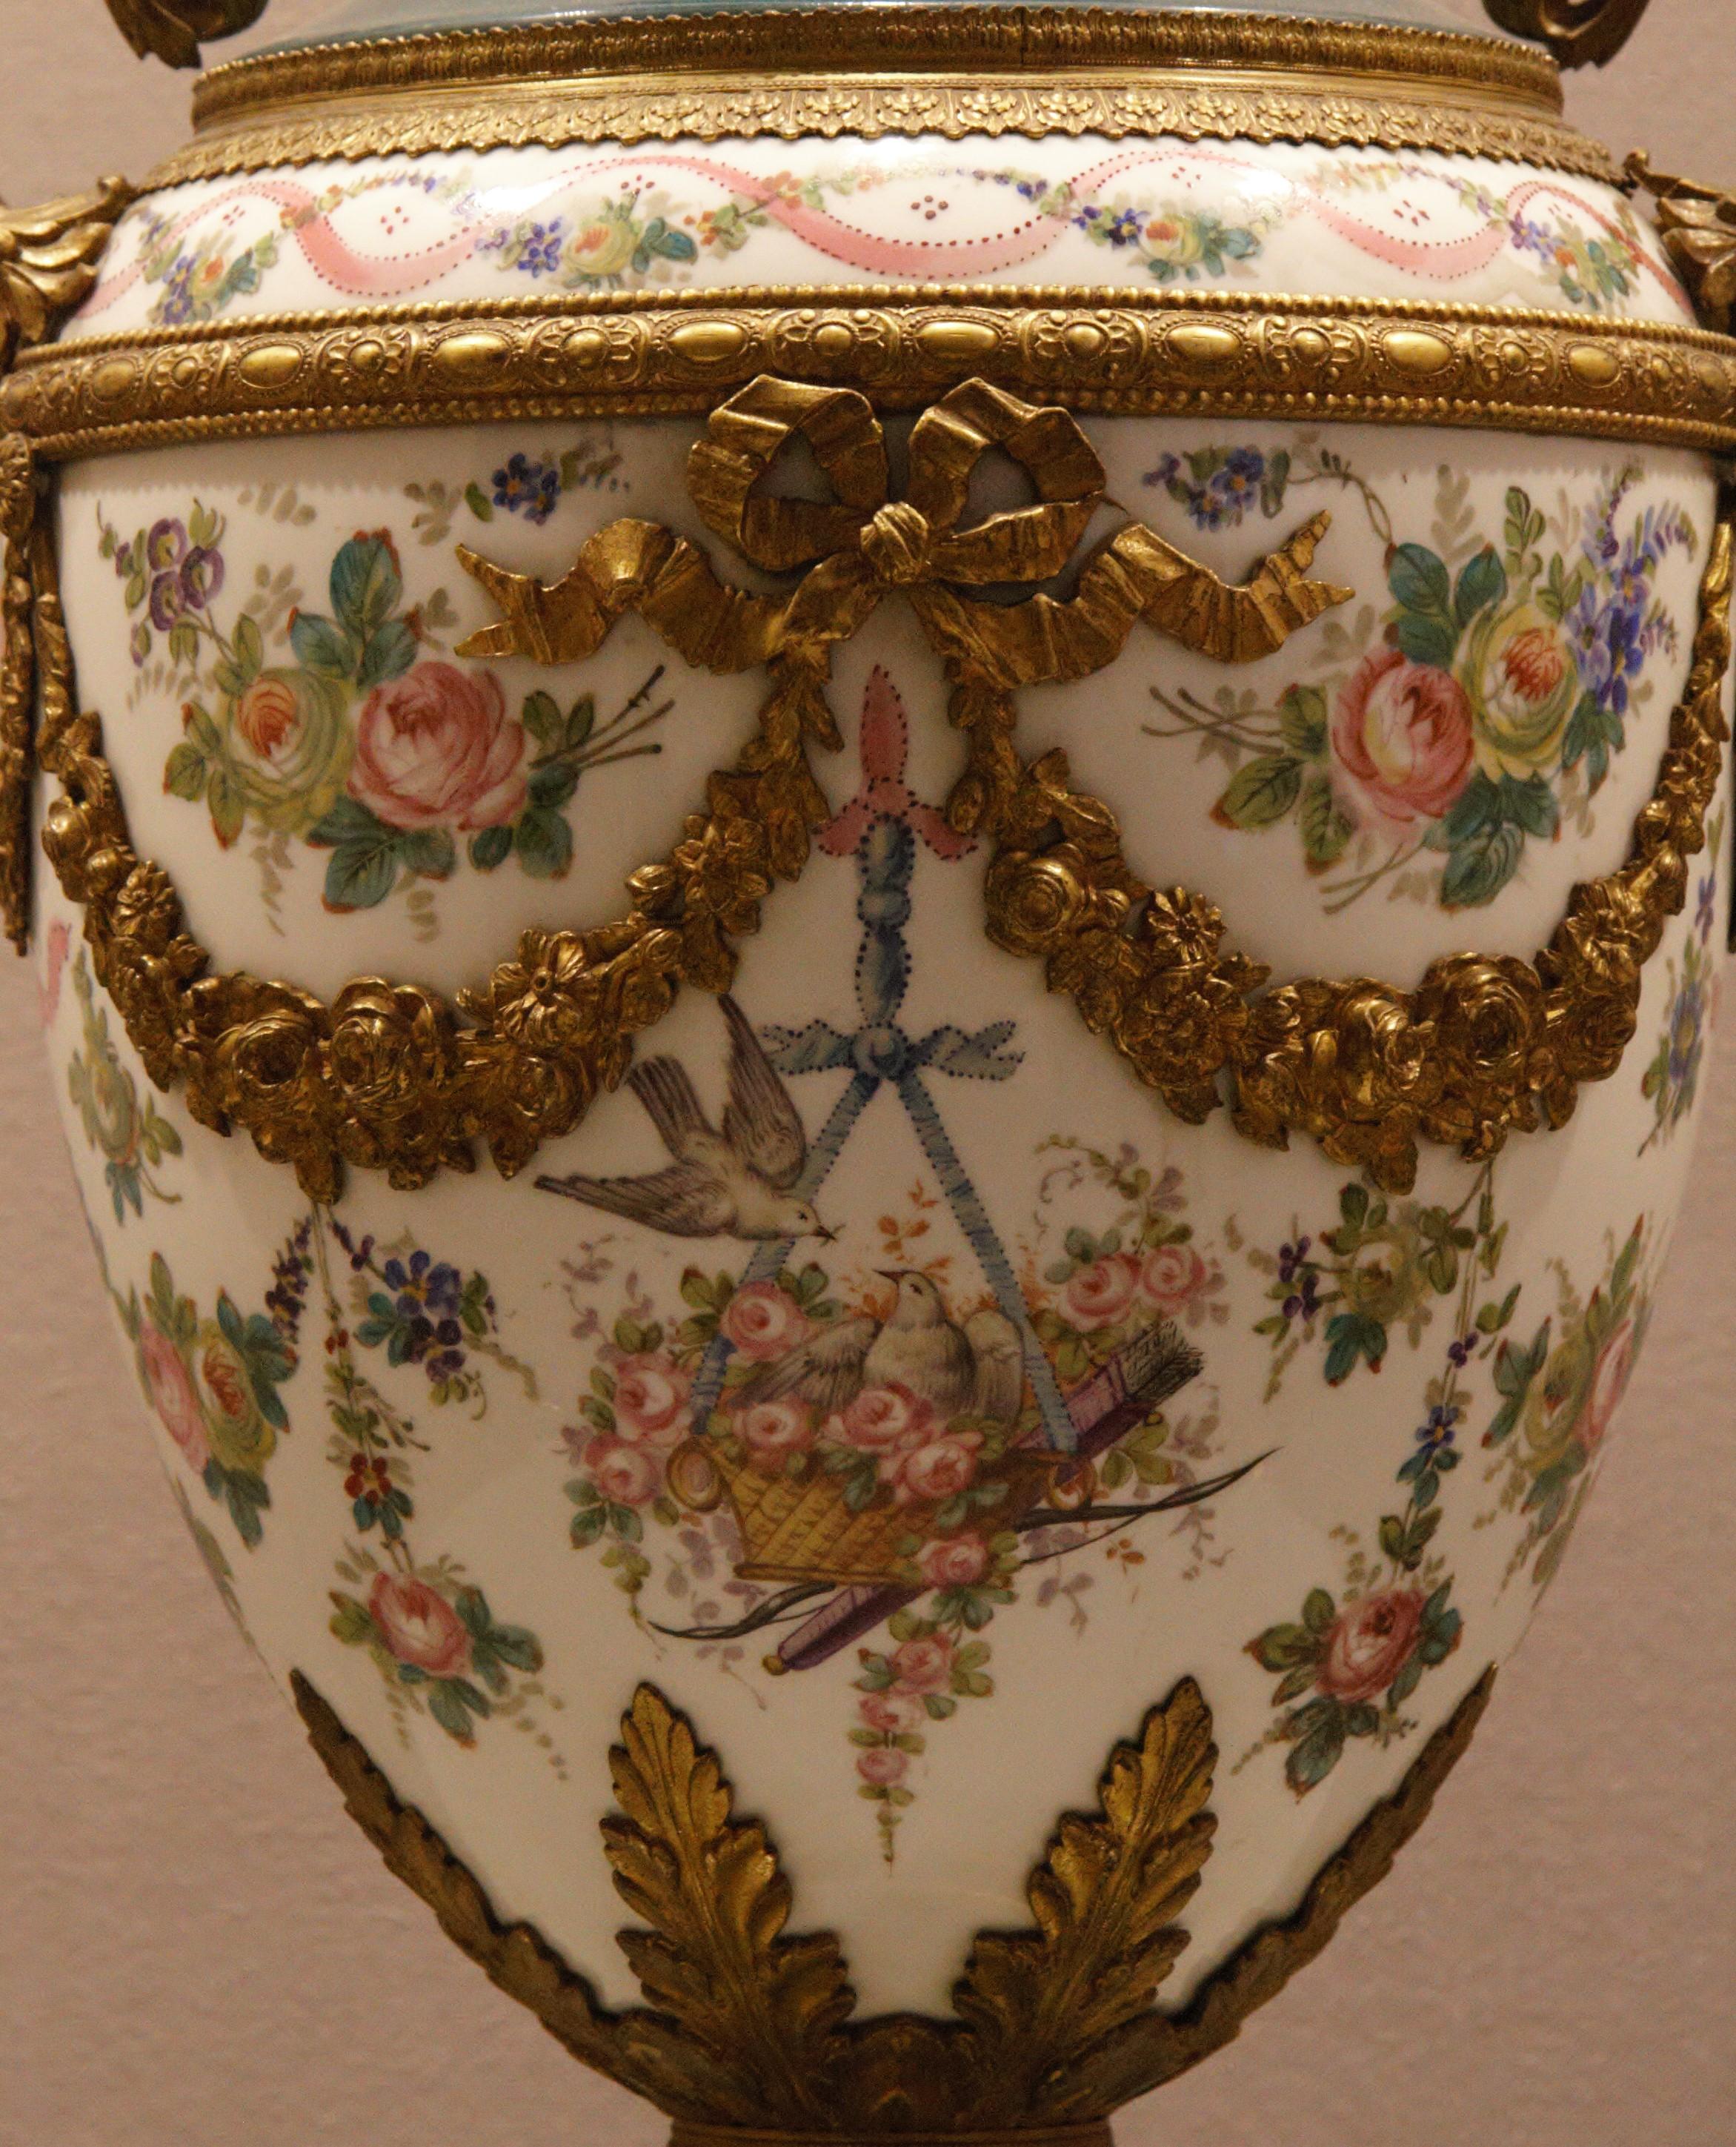 A vase in porcelain finely painted with flowers and turtle doves, garlands in bronze gilt, Louis XVI Style, circa 1890.